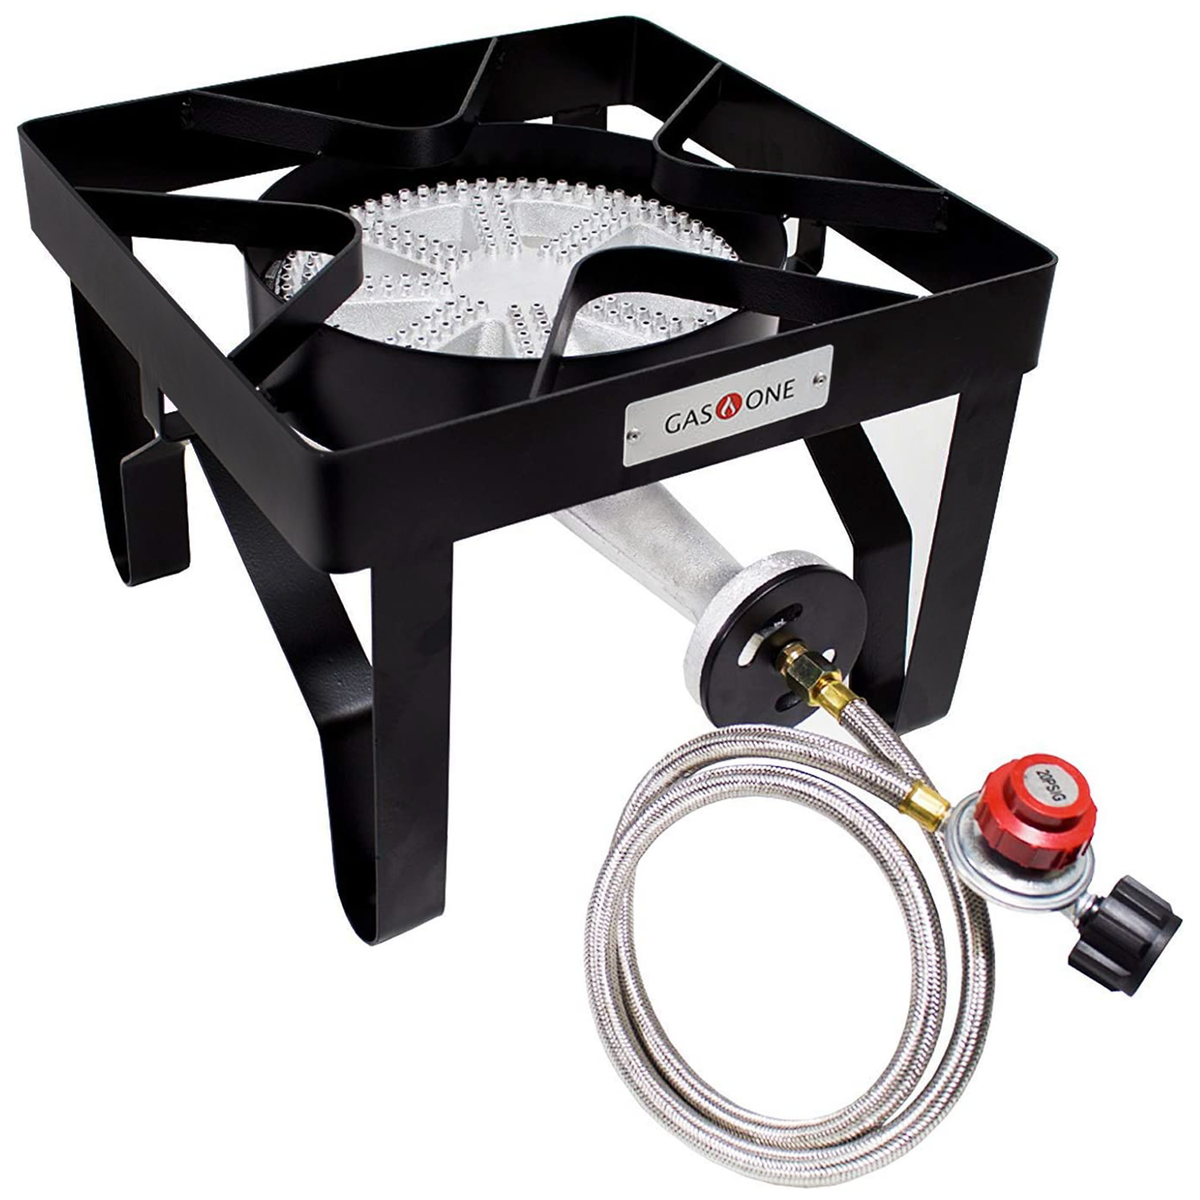 Whisper Baby Propane Gas Forge, 1 Burner with Rear Port